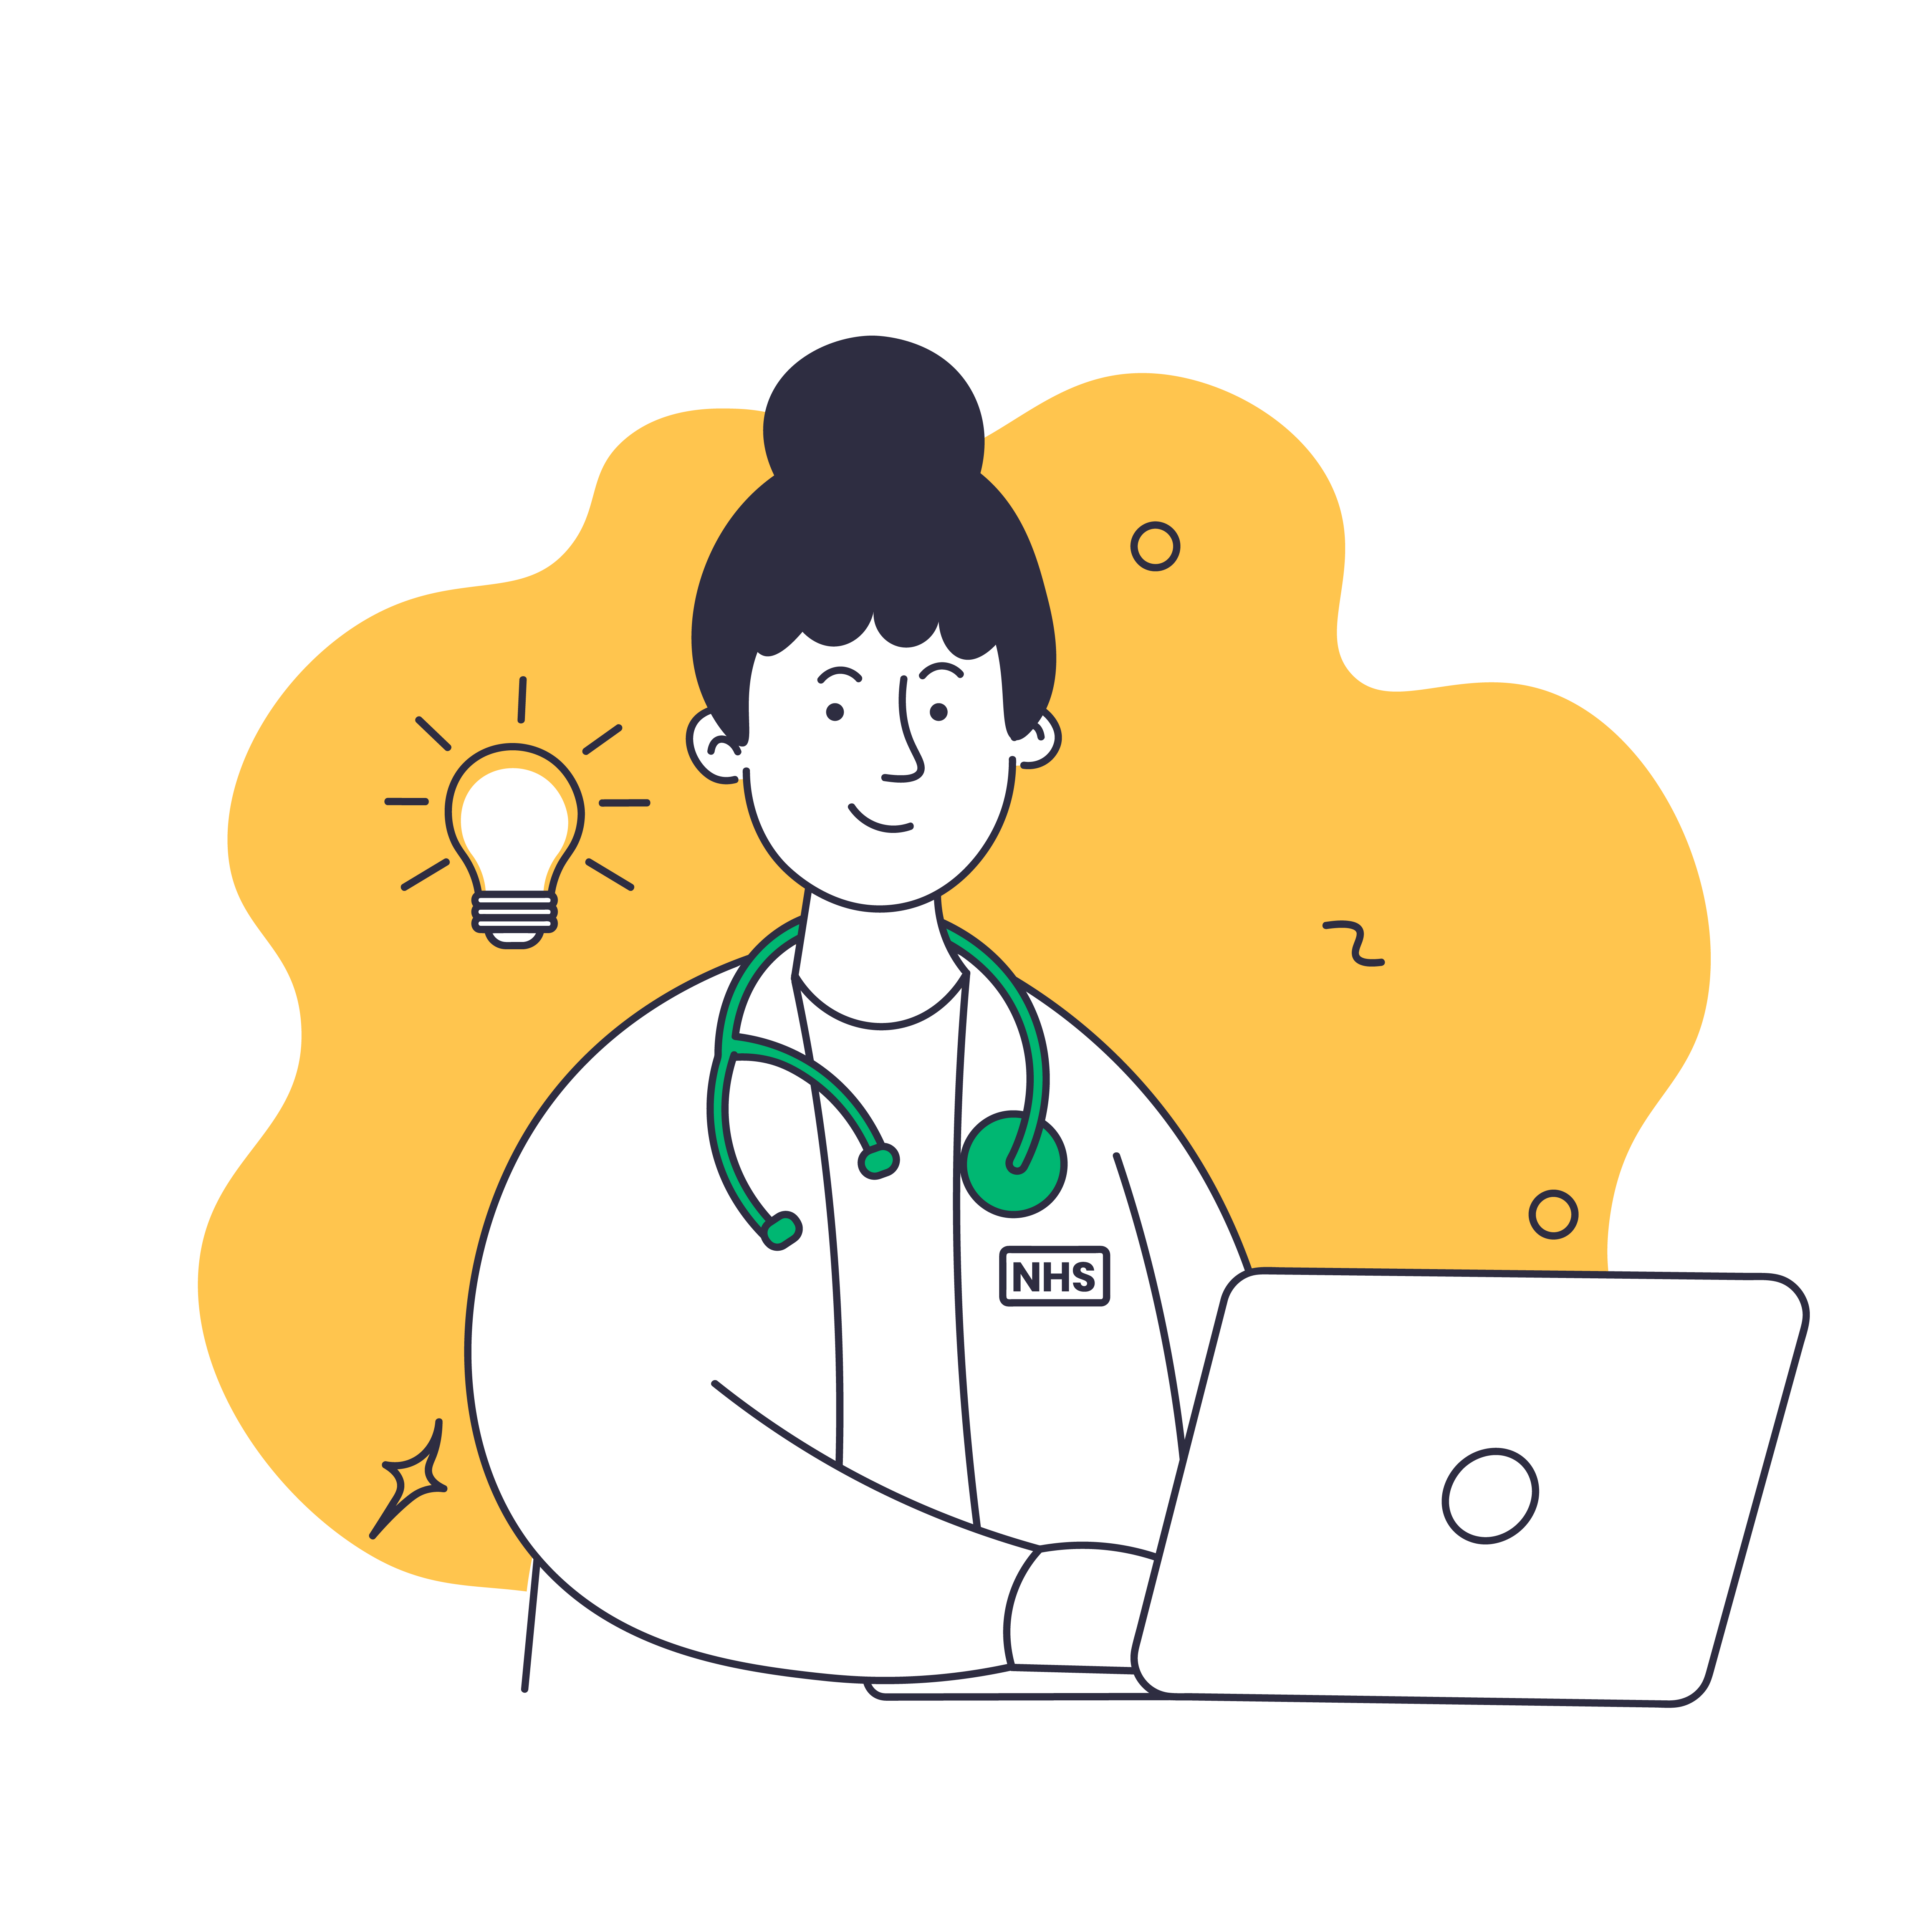 Illustration of a smiling female GP having a bright idea and working on her website content